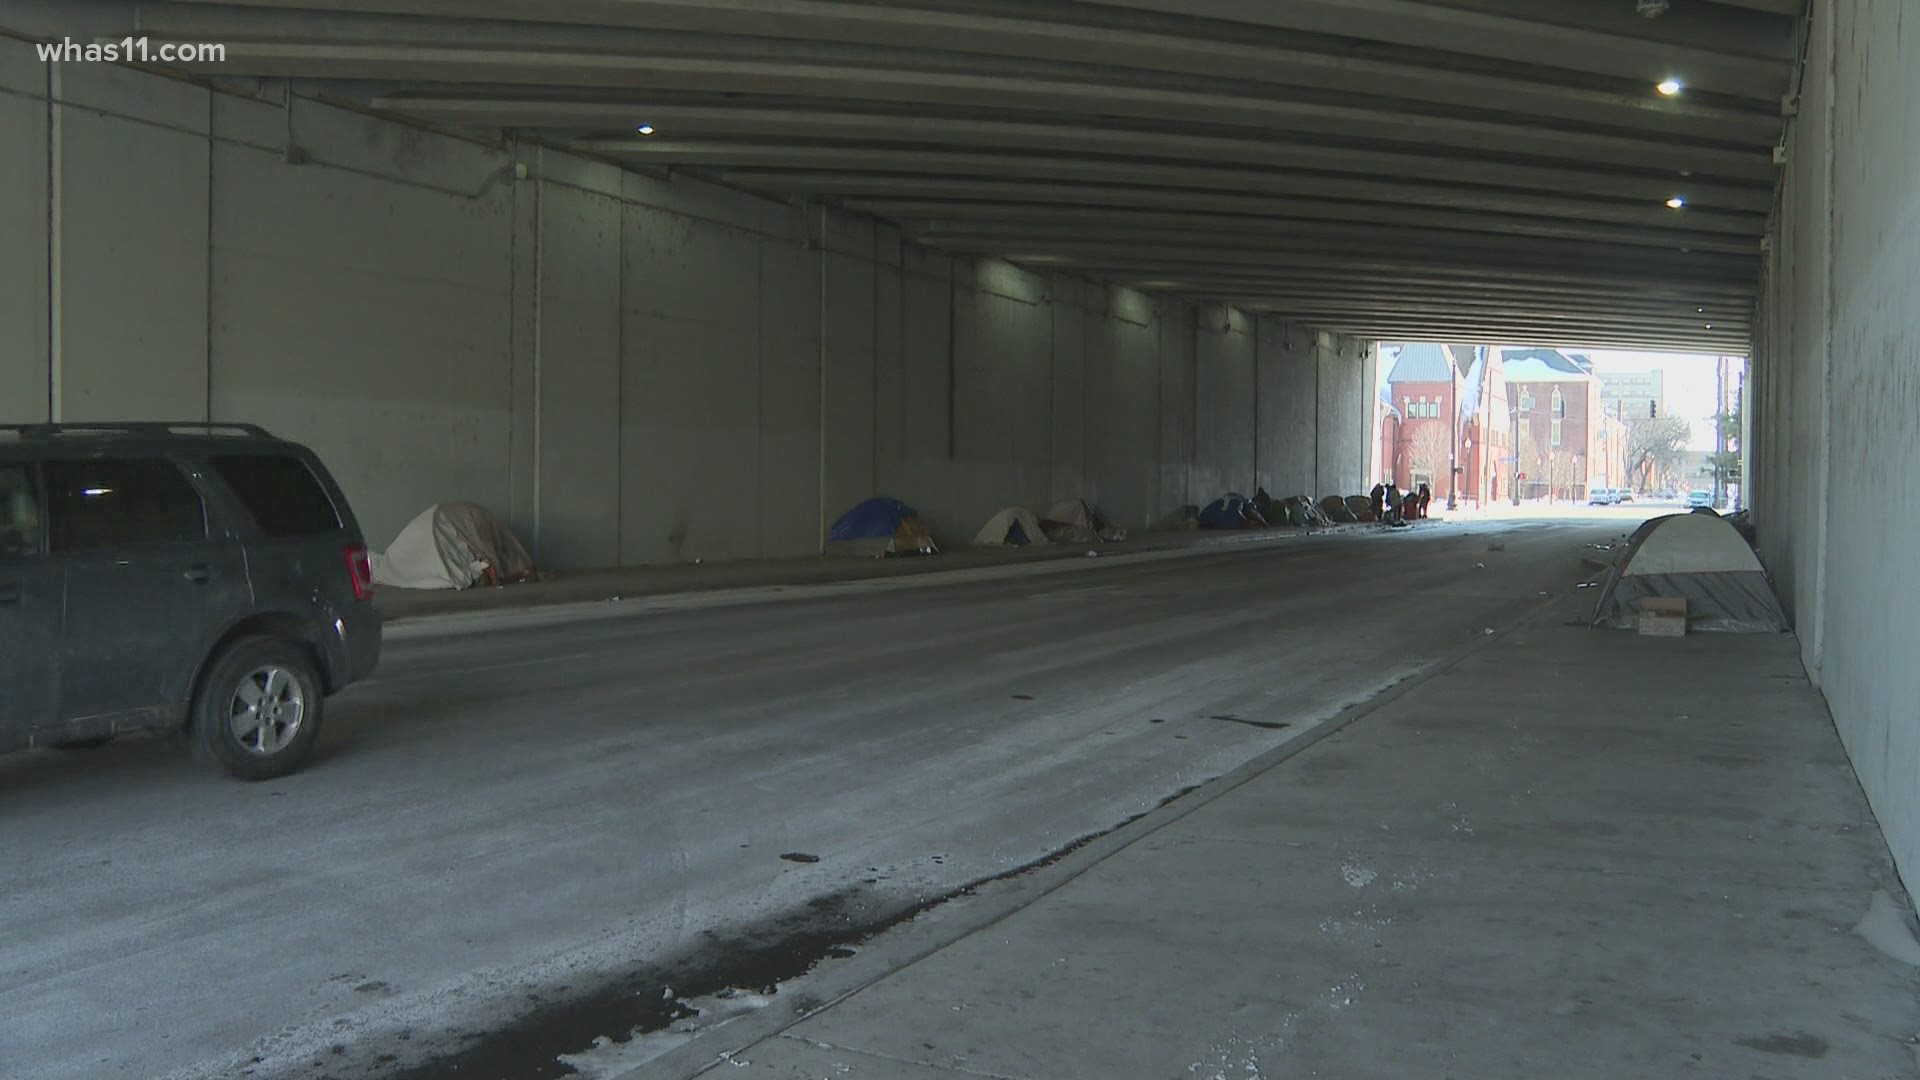 LMPD is taking full blame and apologizing for what it says was a mistake when a homeless encampment was cleared out downtown.